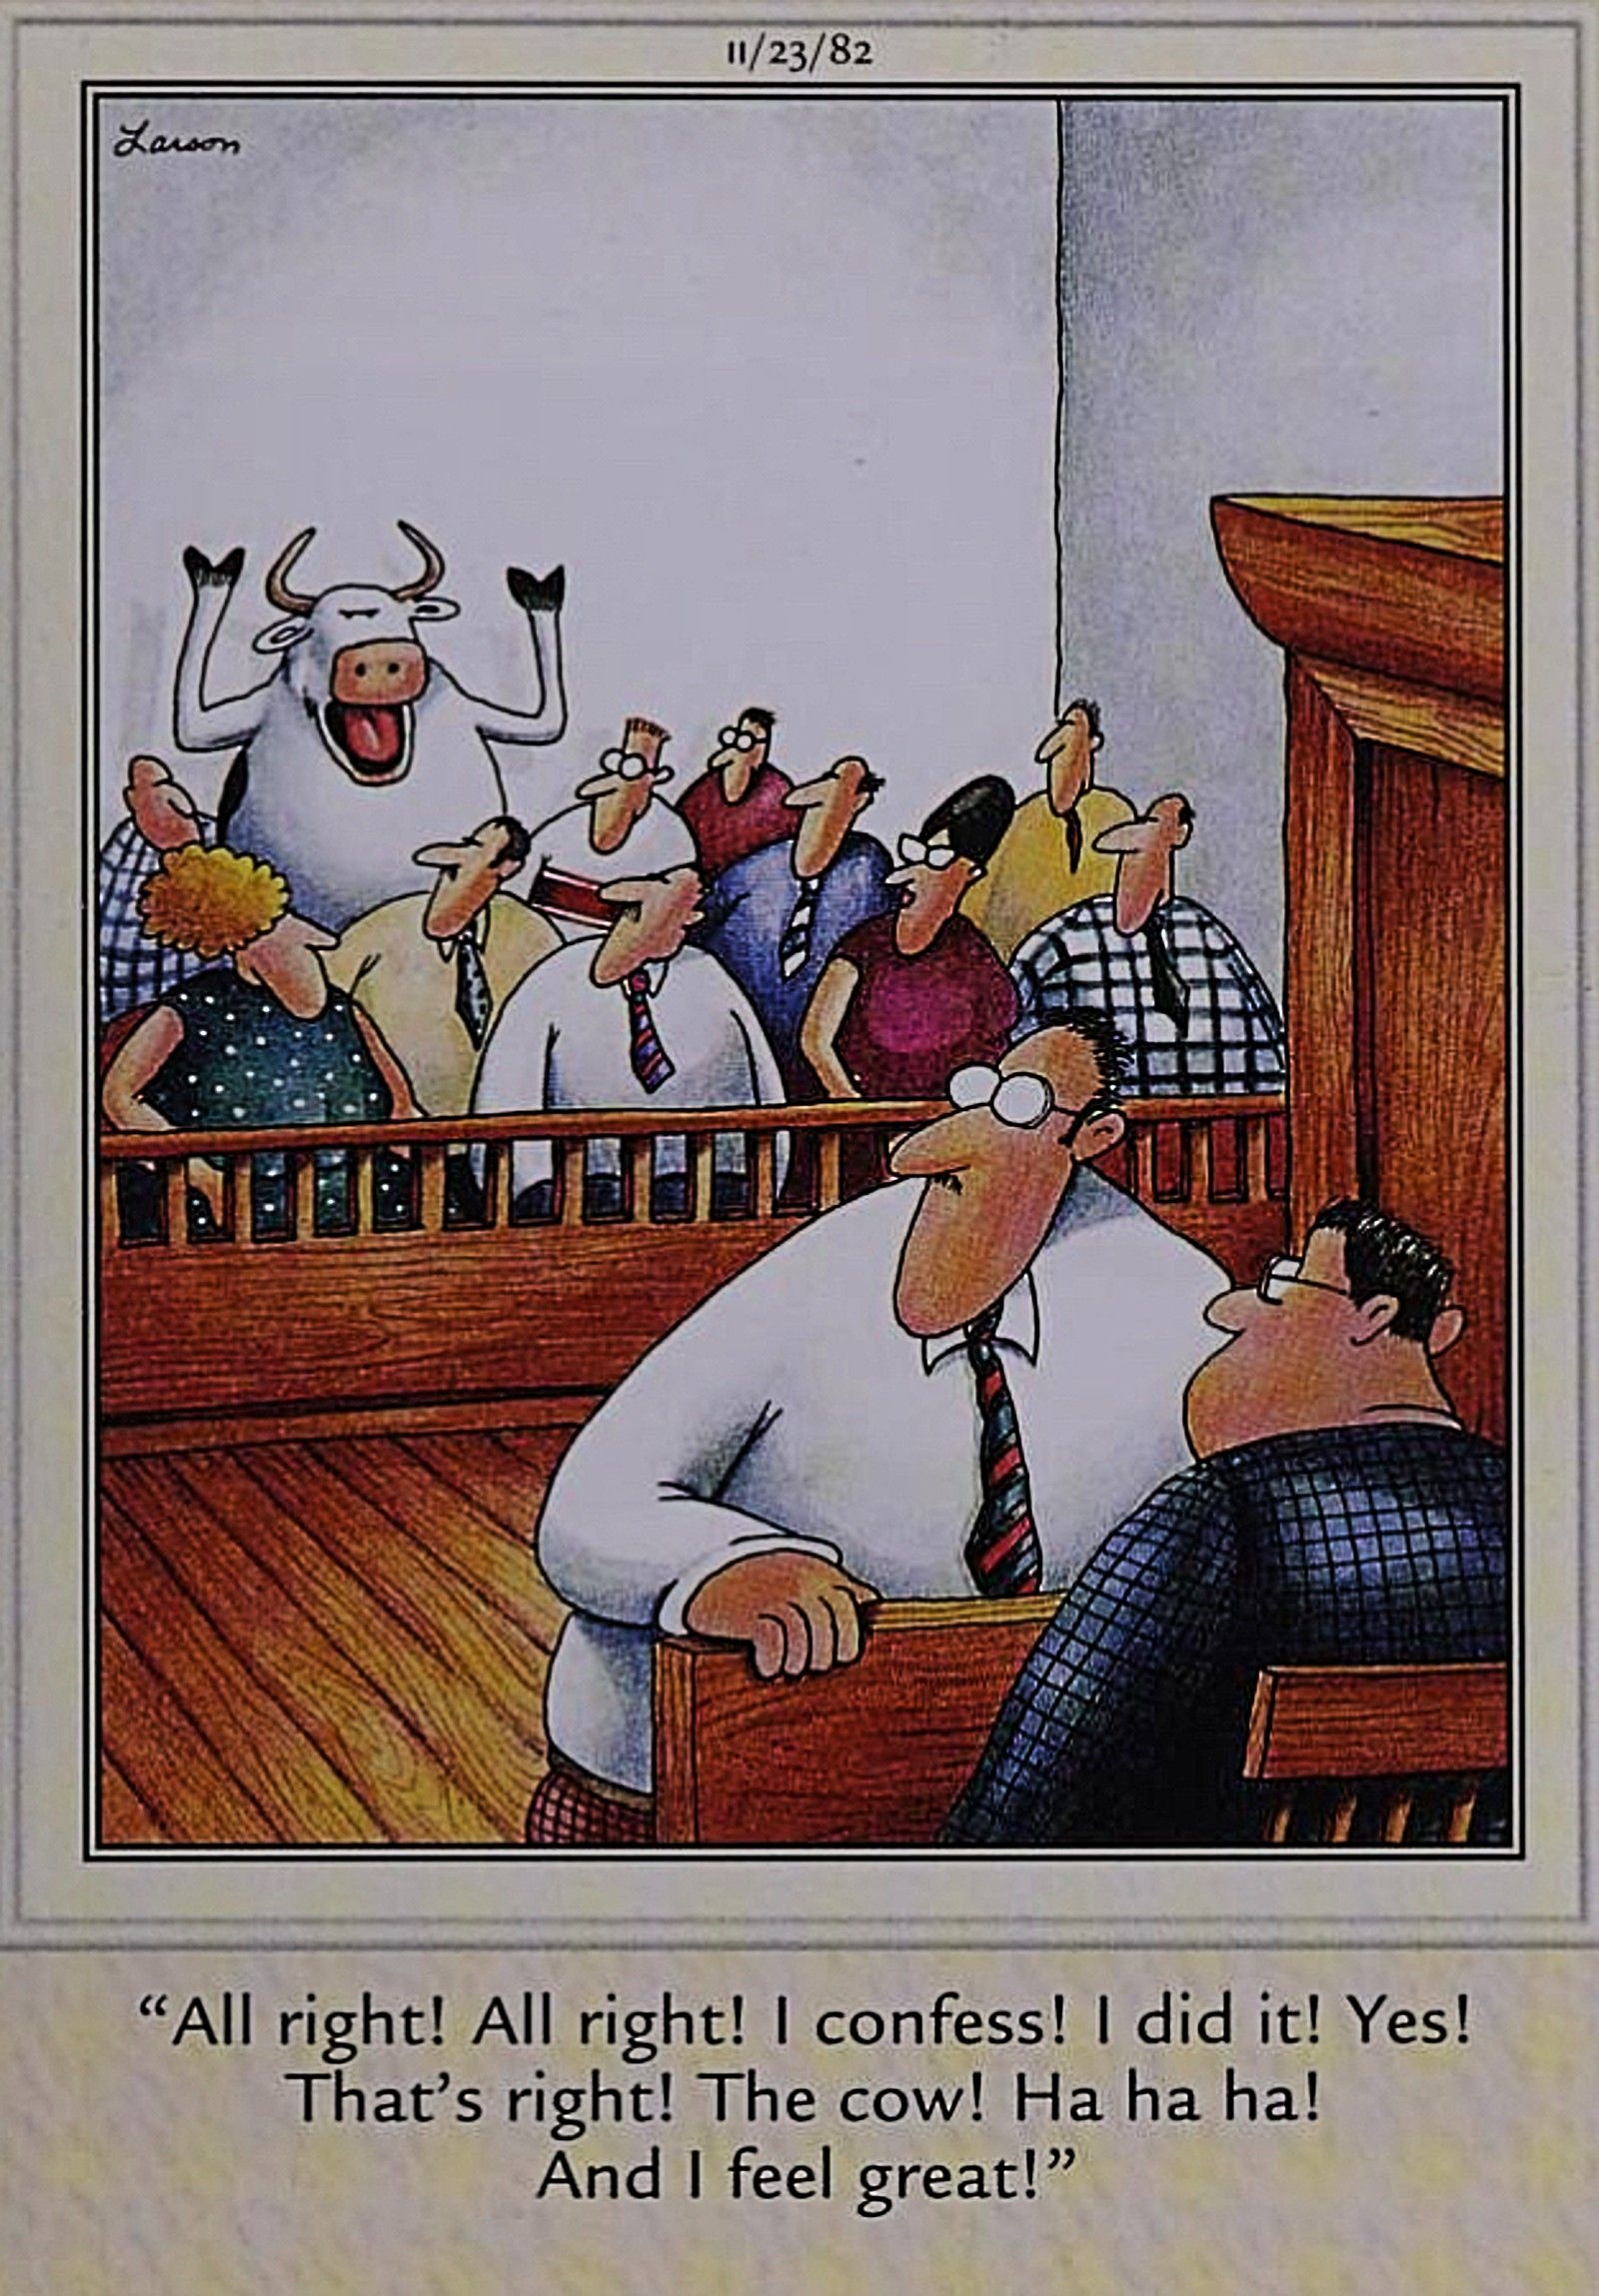 The Far Side, a startling courtroom confession from a cow seated amongst the jury